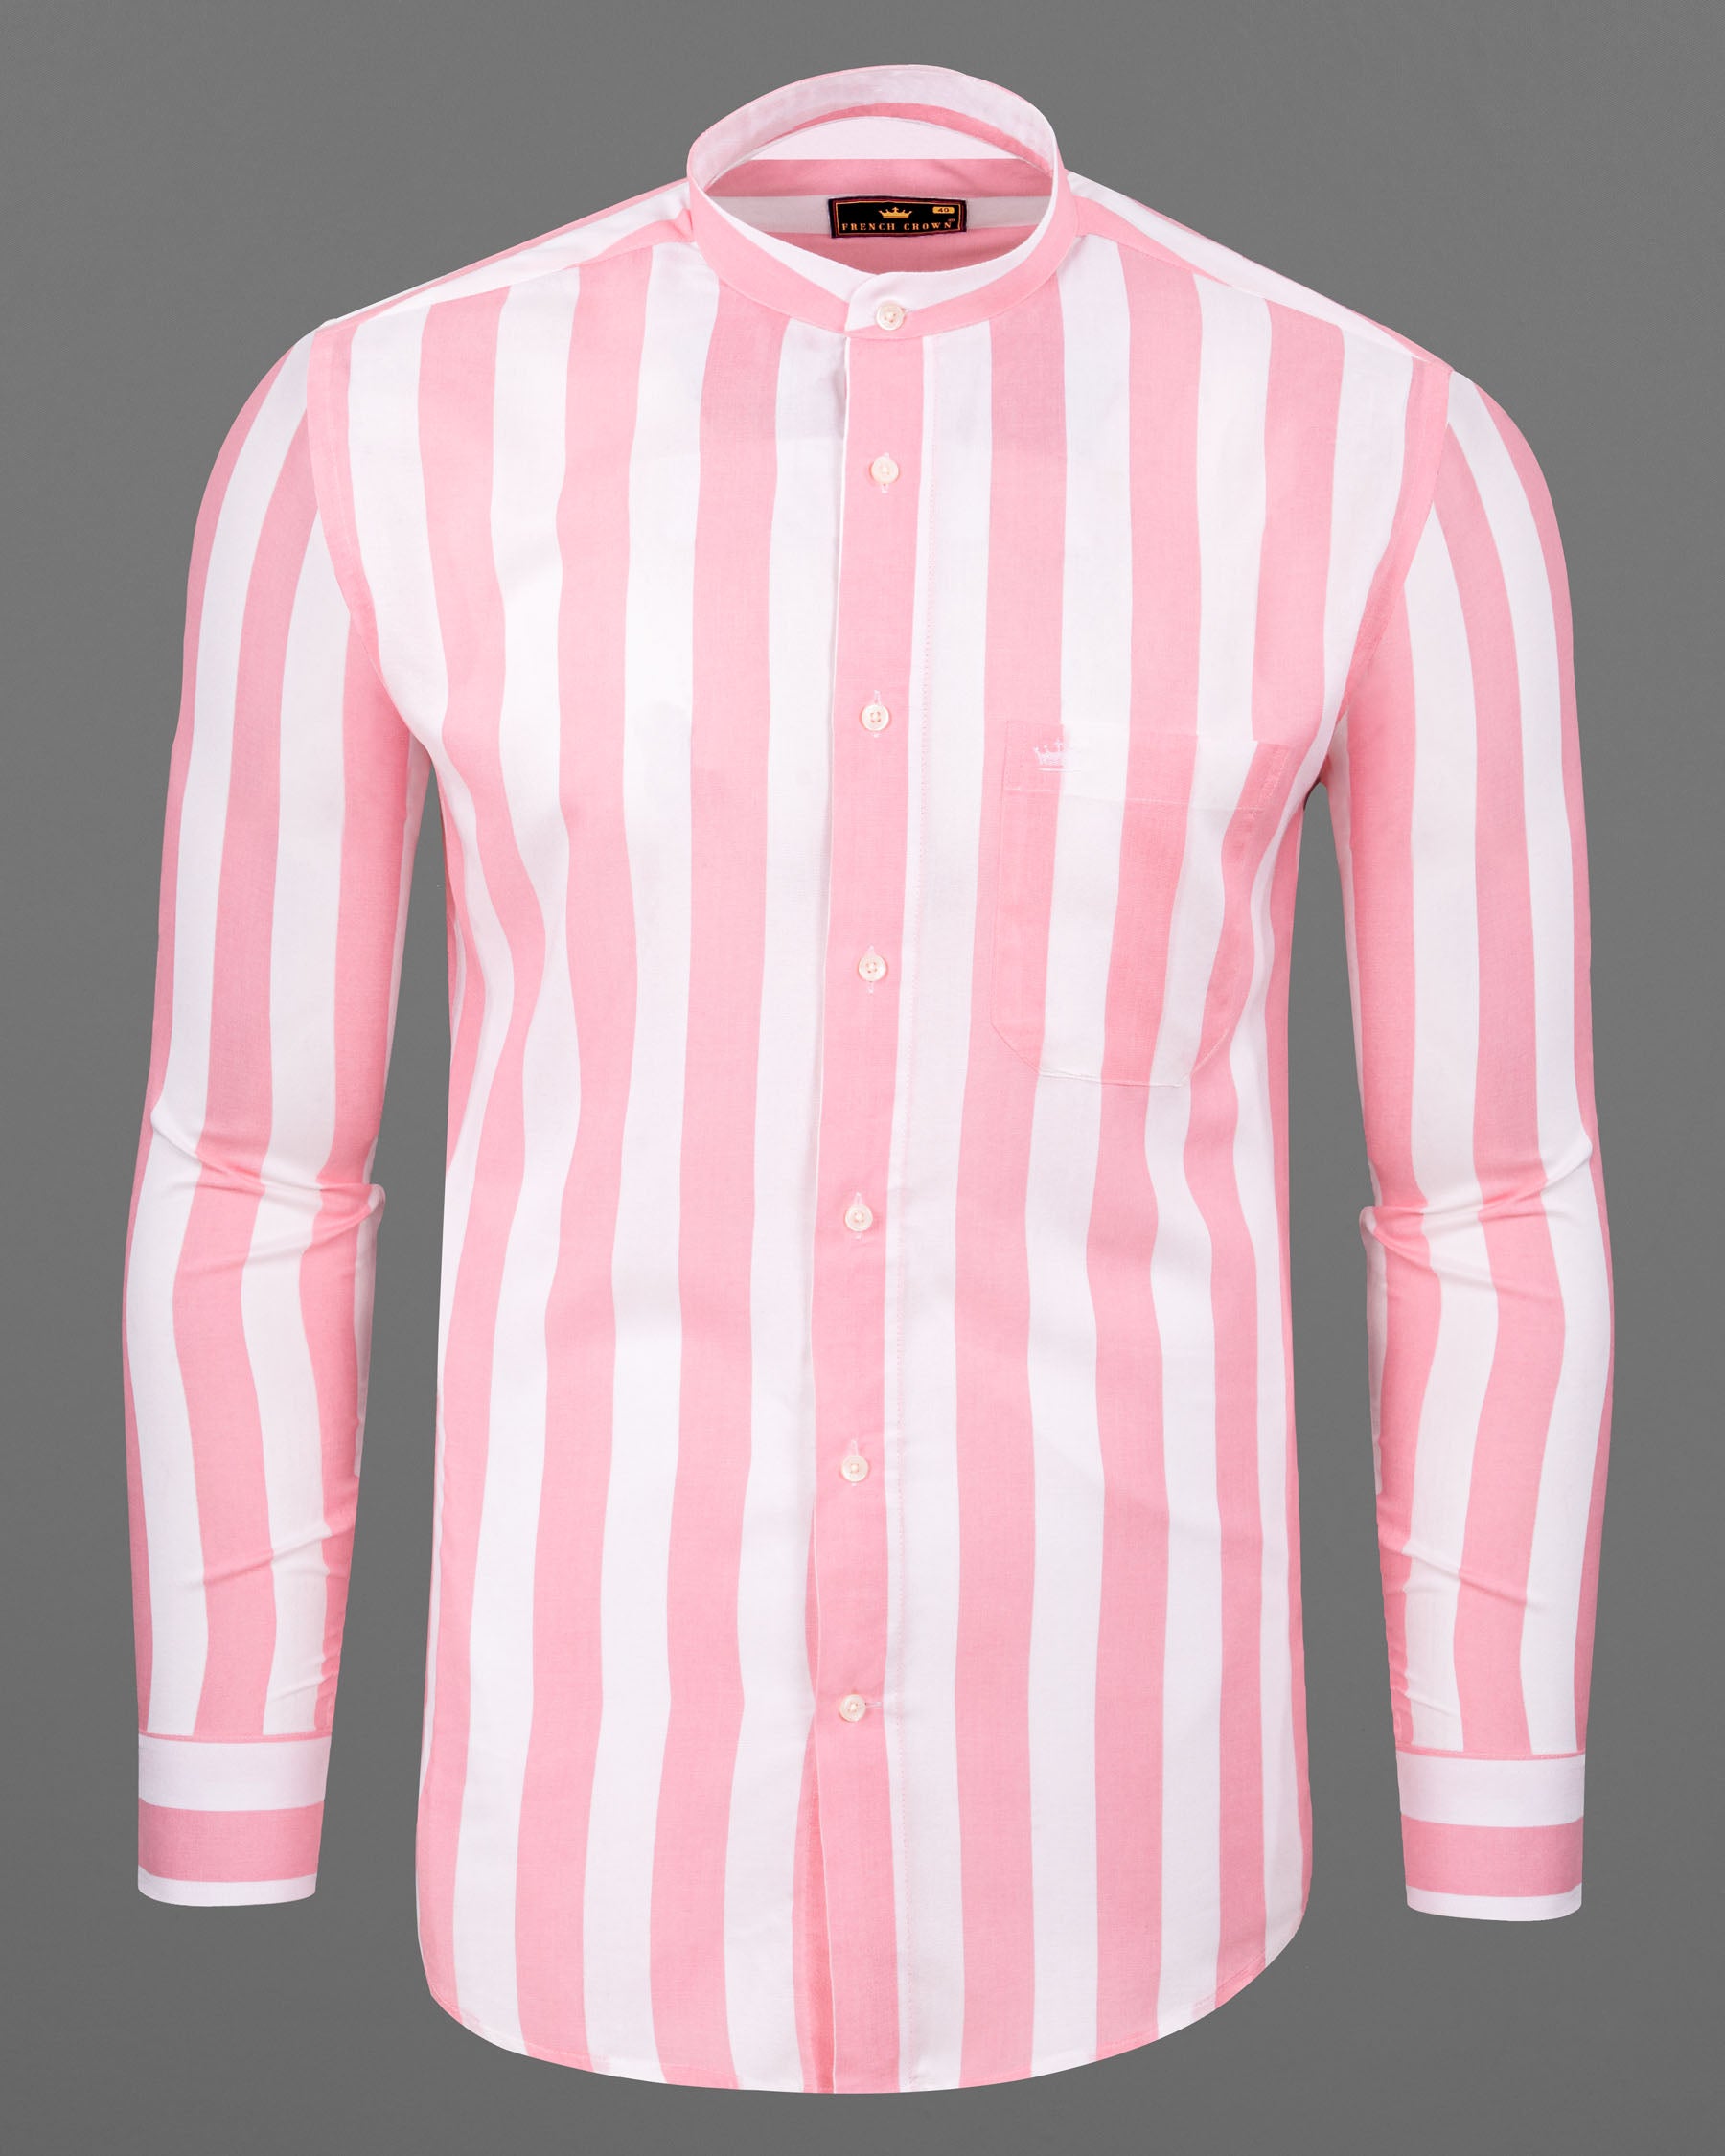 Kawaii Pink with Bright White Thick Striped Premium Tencel Shirt 6039-M-38, 6039-M-H-38, 6039-M-39, 6039-M-H-39, 6039-M-40, 6039-M-H-40, 6039-M-42, 6039-M-H-42, 6039-M-44, 6039-M-H-44, 6039-M-46, 6039-M-H-46, 6039-M-48, 6039-M-H-48, 6039-M-50, 6039-M-H-50, 6039-M-52, 6039-M-H-52